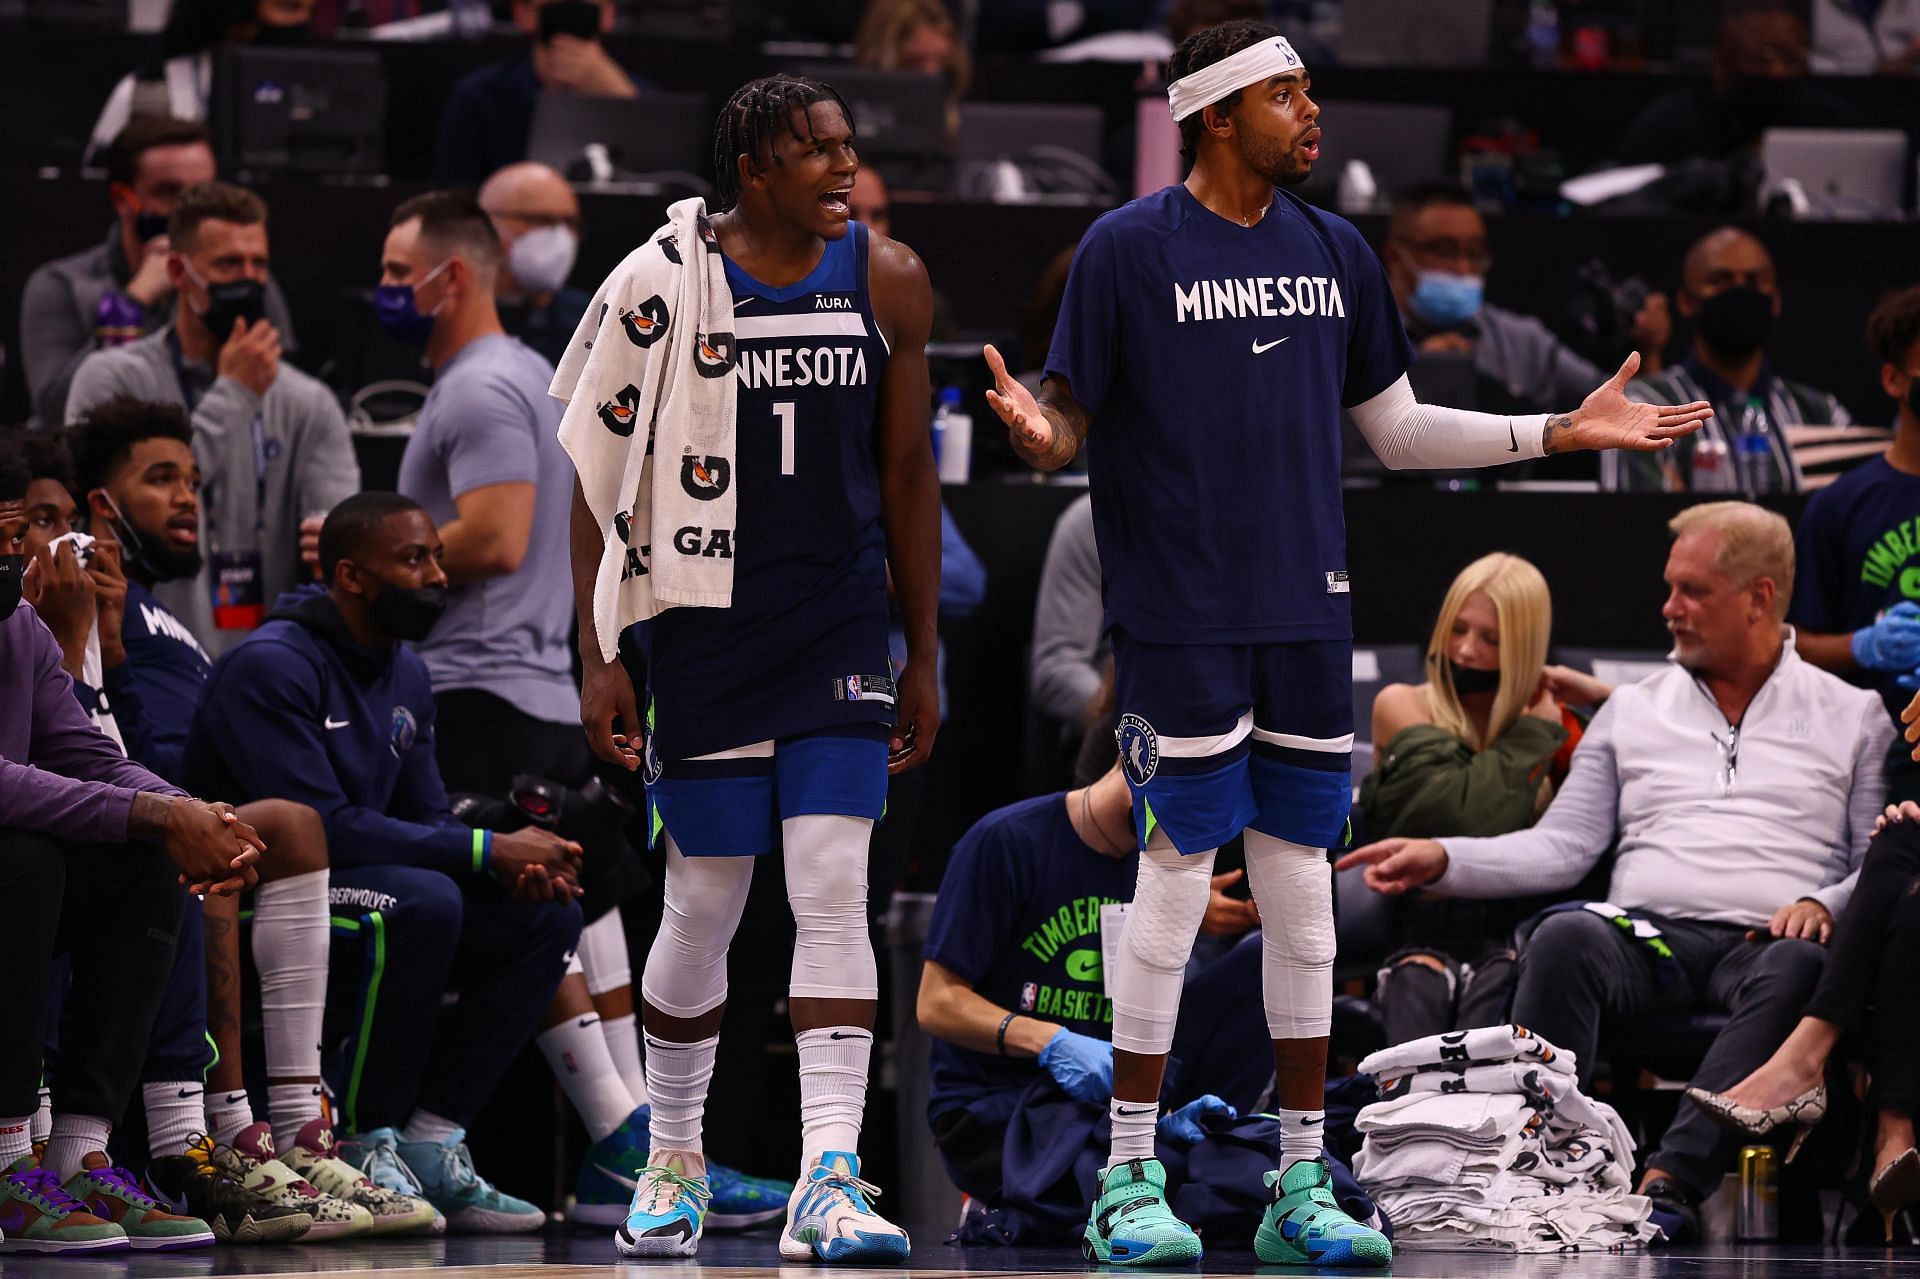 The Minnesota Timberwolves bench looks on at the game